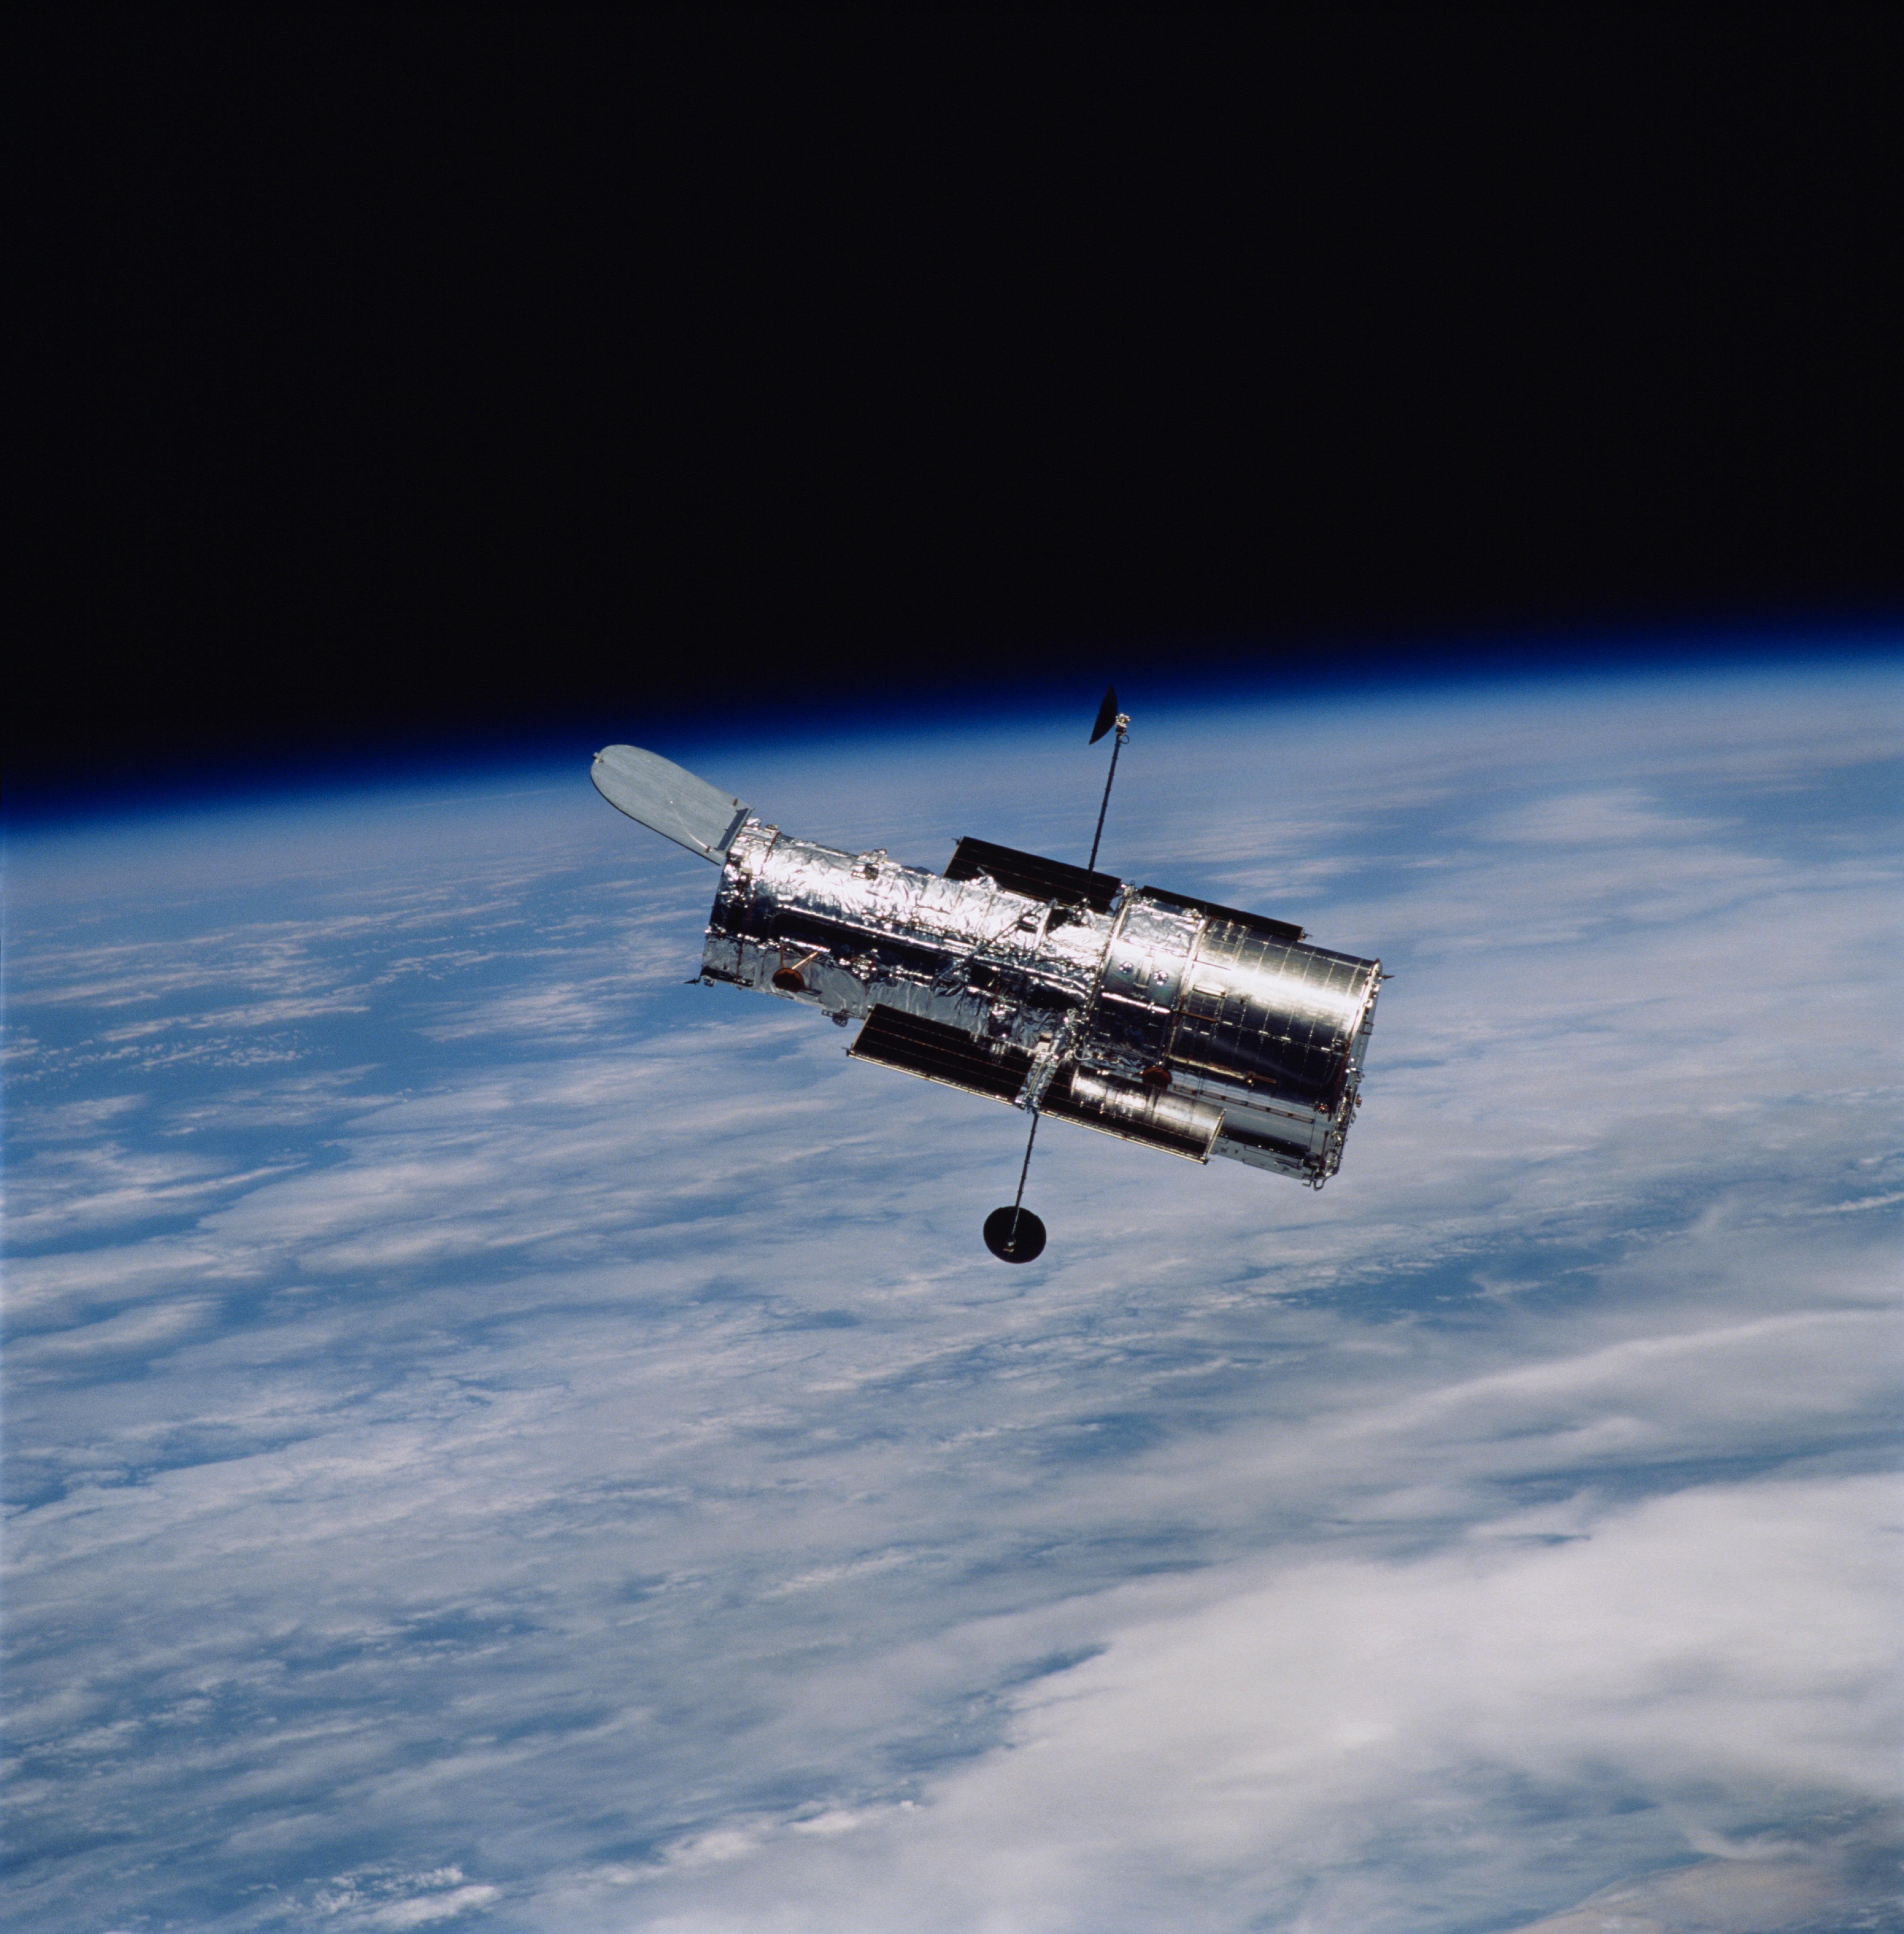 Hubble Space Telescope in space with Earth in the background.